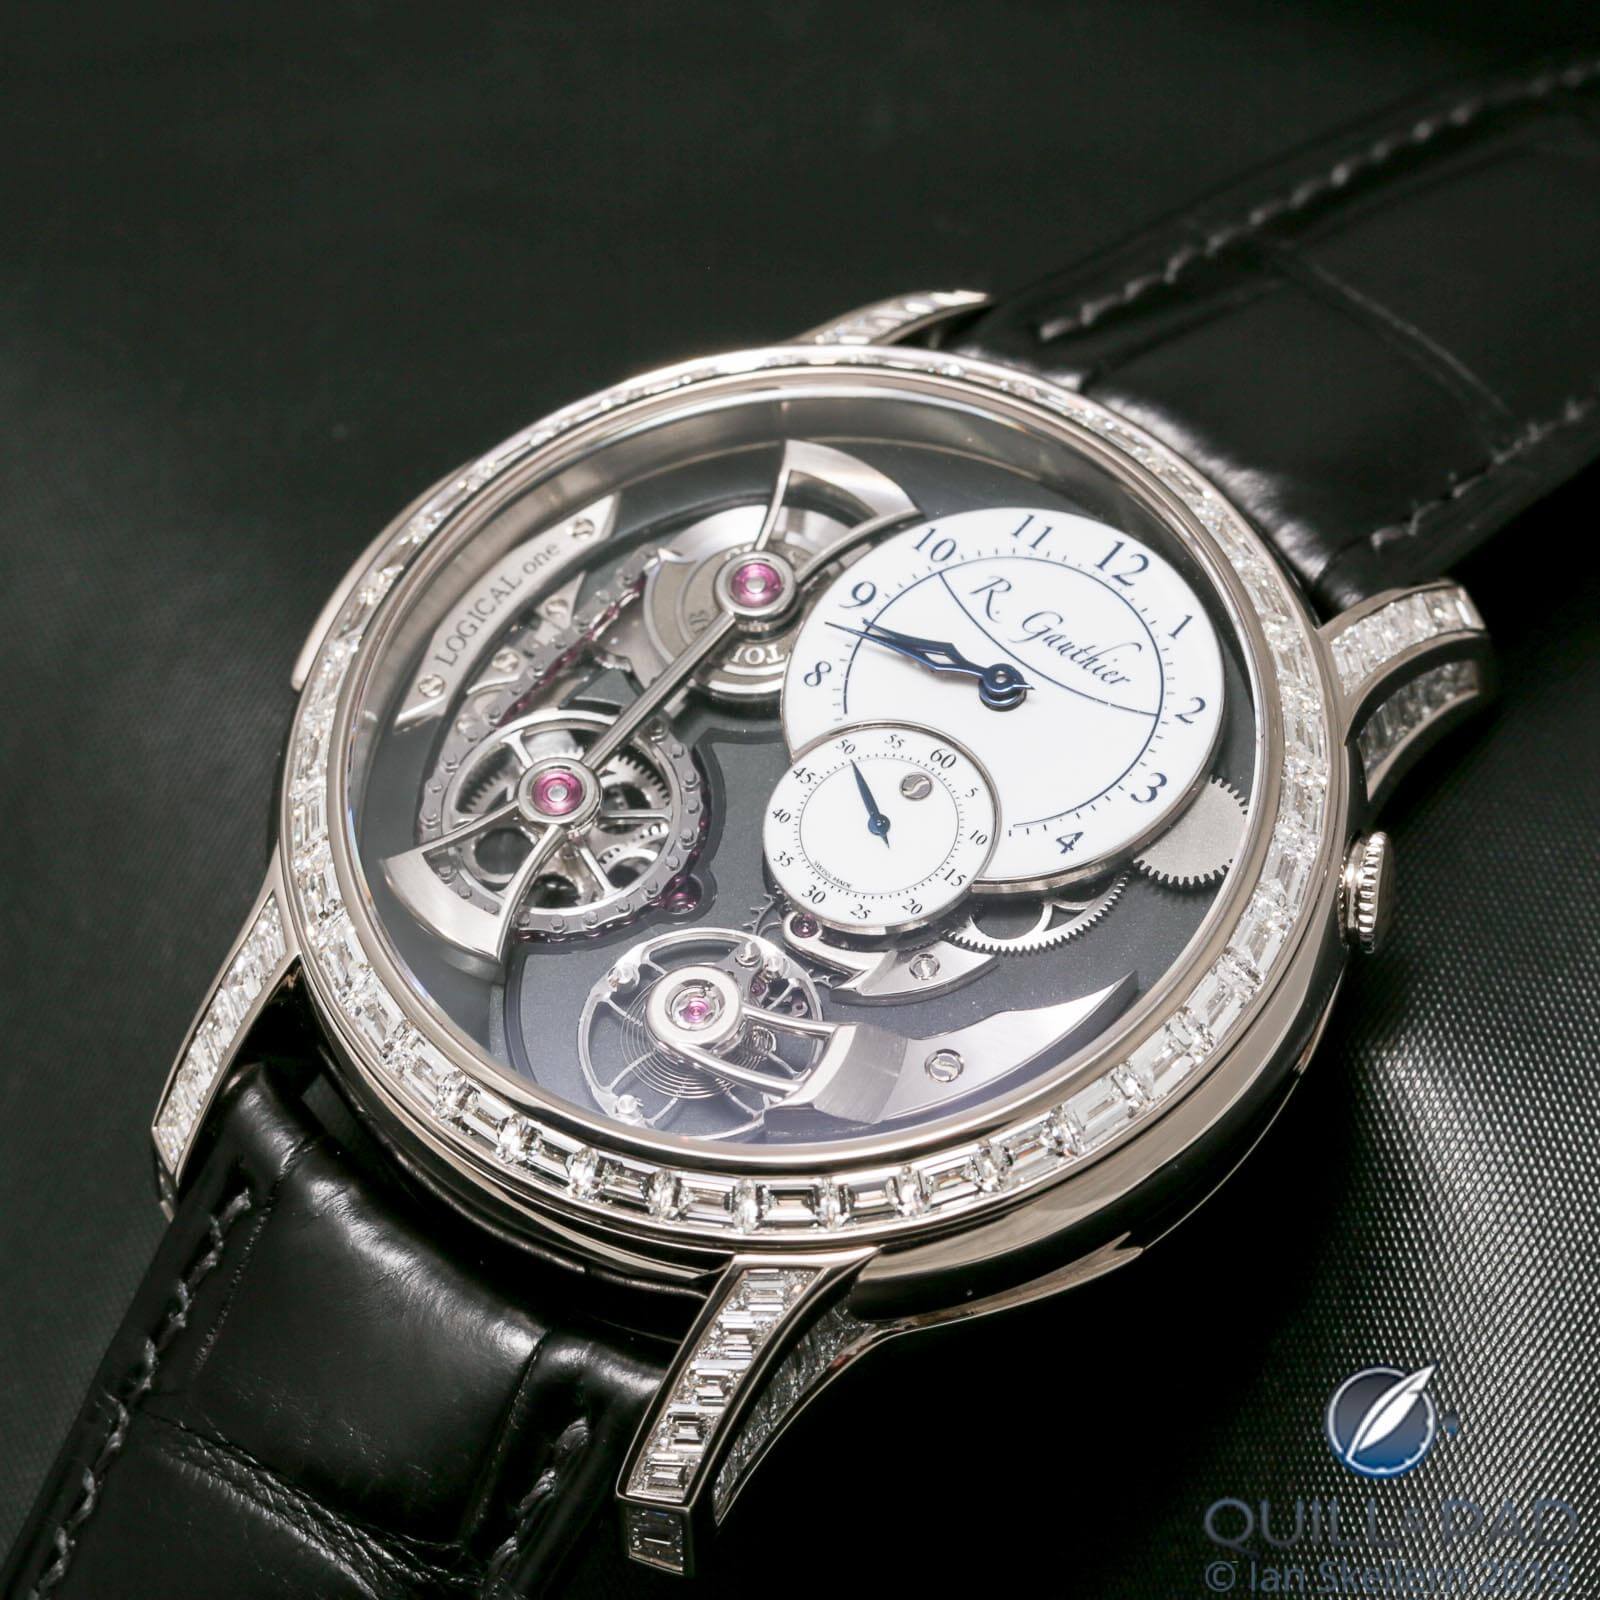 Diamond-set Logical One by Romain Gauthier